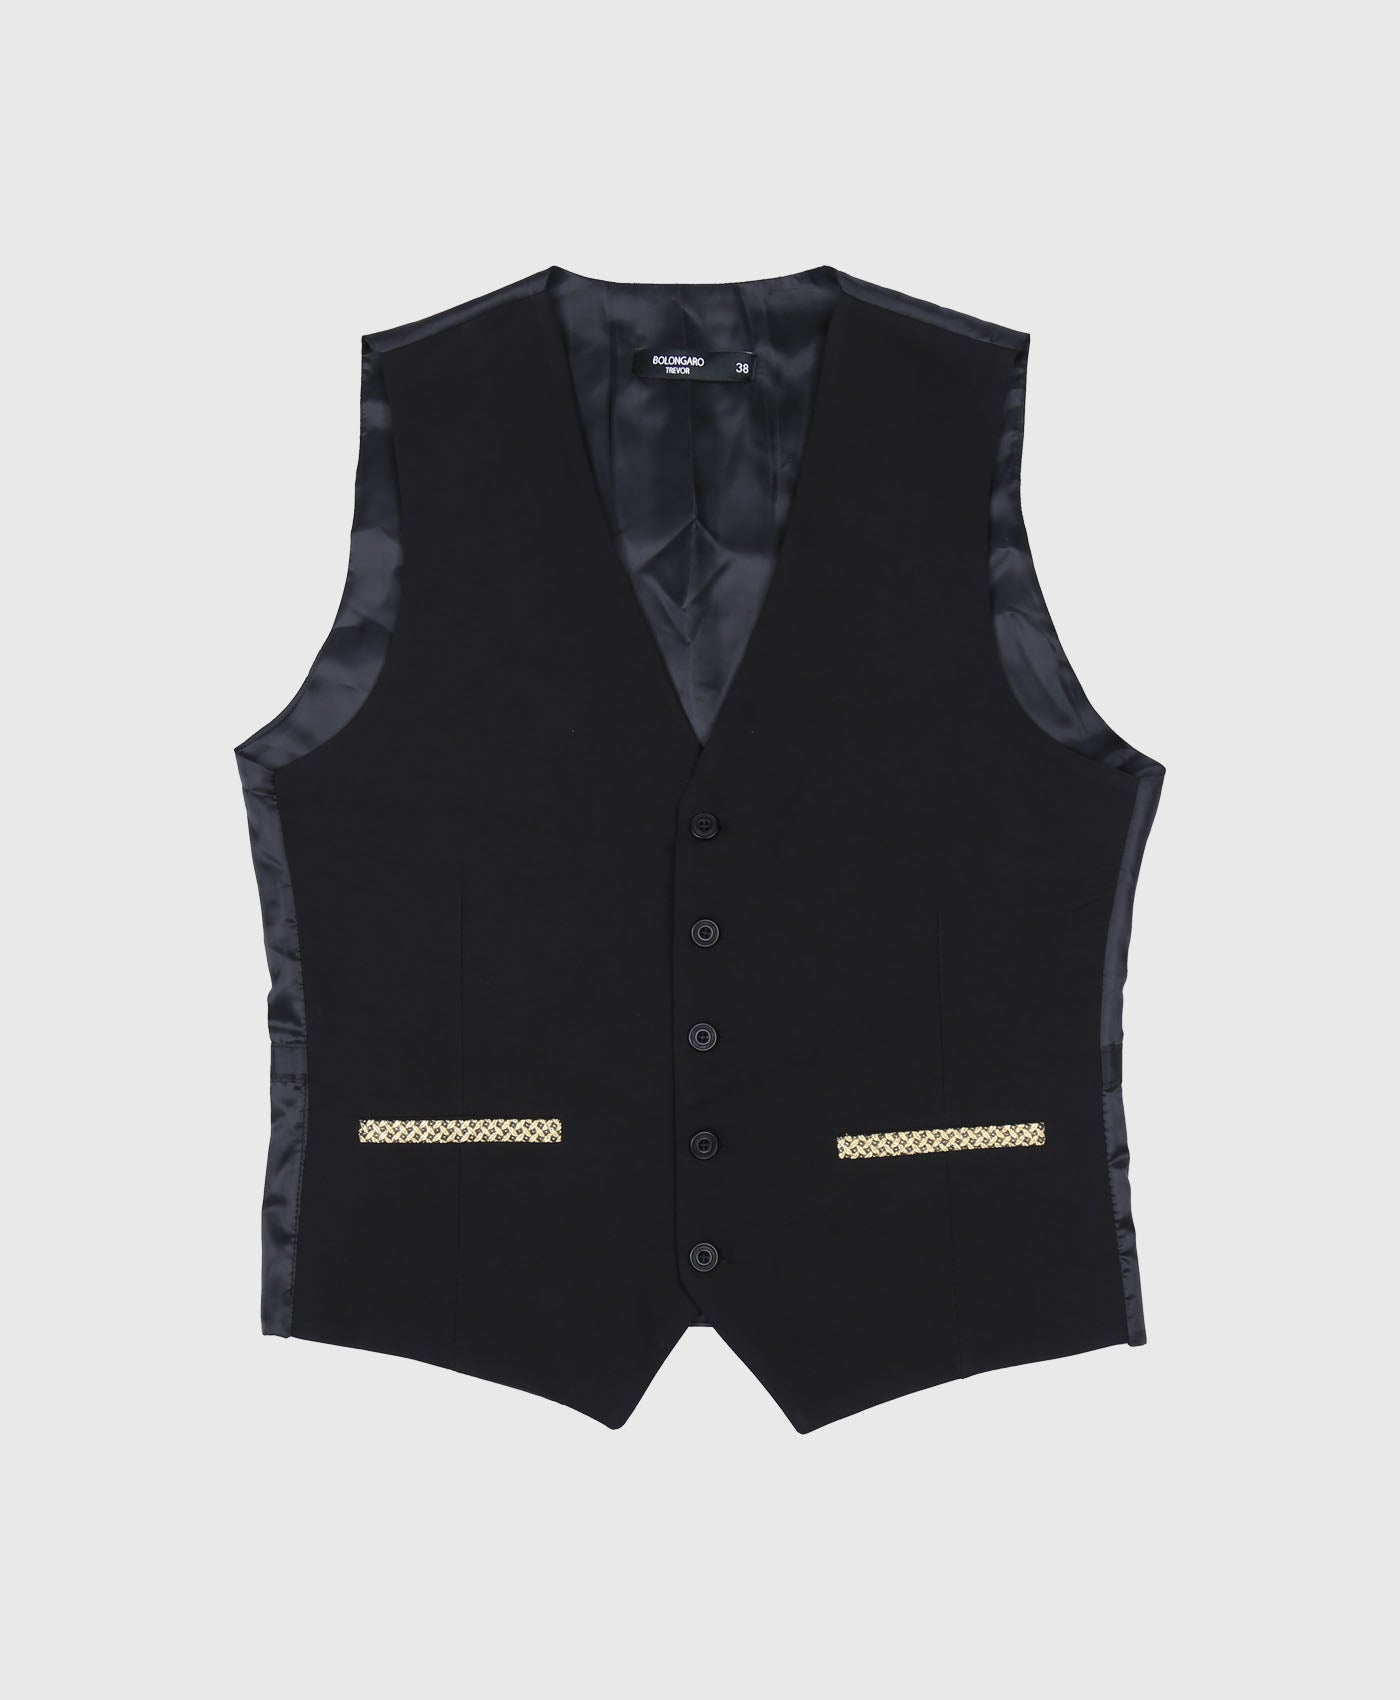 Waistcoat In Black With Gold Contrast Pockets